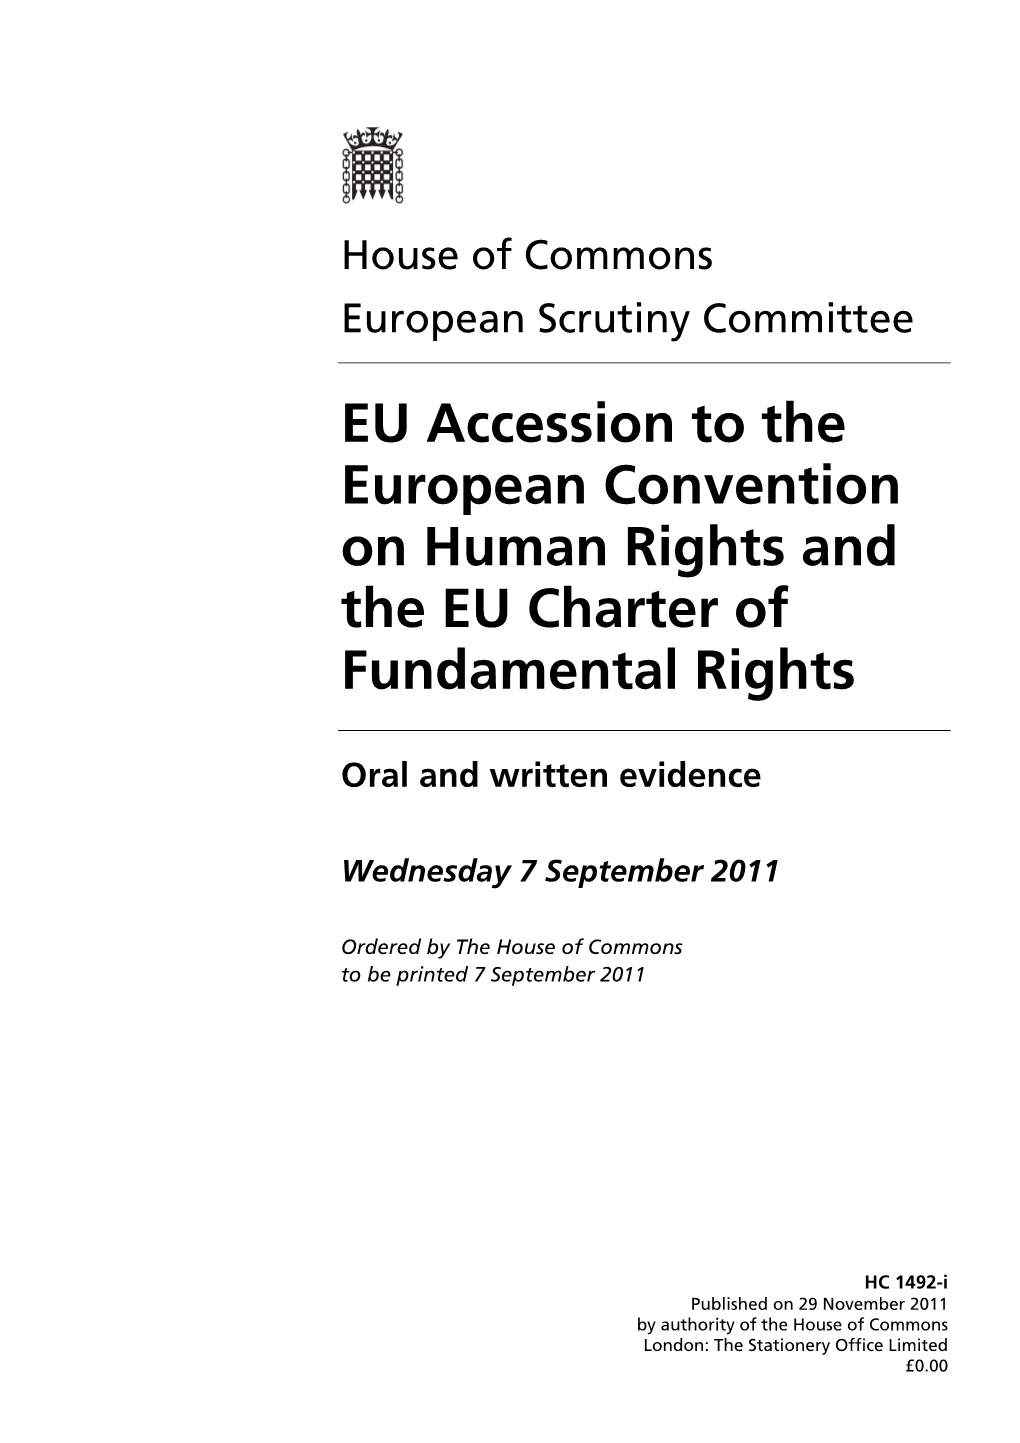 EU Accession to the European Convention on Human Rights and the EU Charter of Fundamental Rights